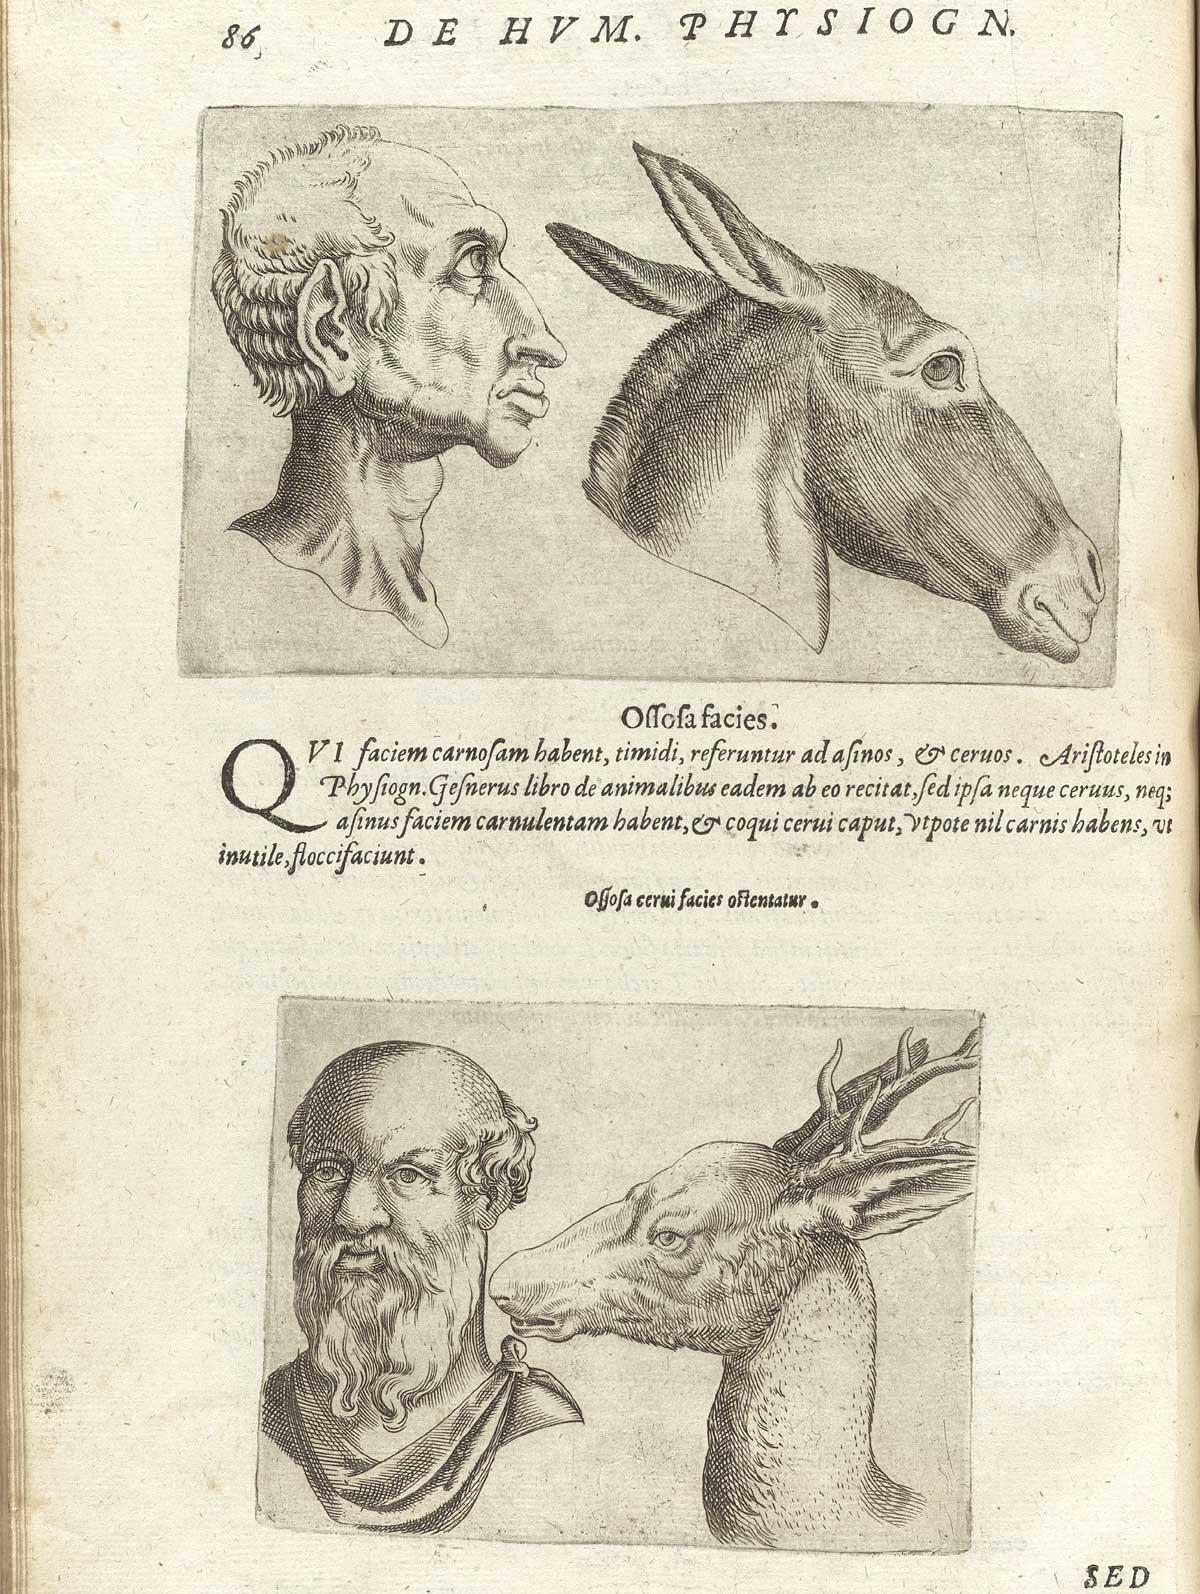 Page 86 of Giambattista della Porta's De humana physiognomonia libri IIII, featuring an upper and lower image. In the top image has the head and shoulders right side view of a man with a long jaw and ears and donkey. The bottom image has the head and shoulders front view of man with a beard on the left and a deer with antlers facing the man on the right.